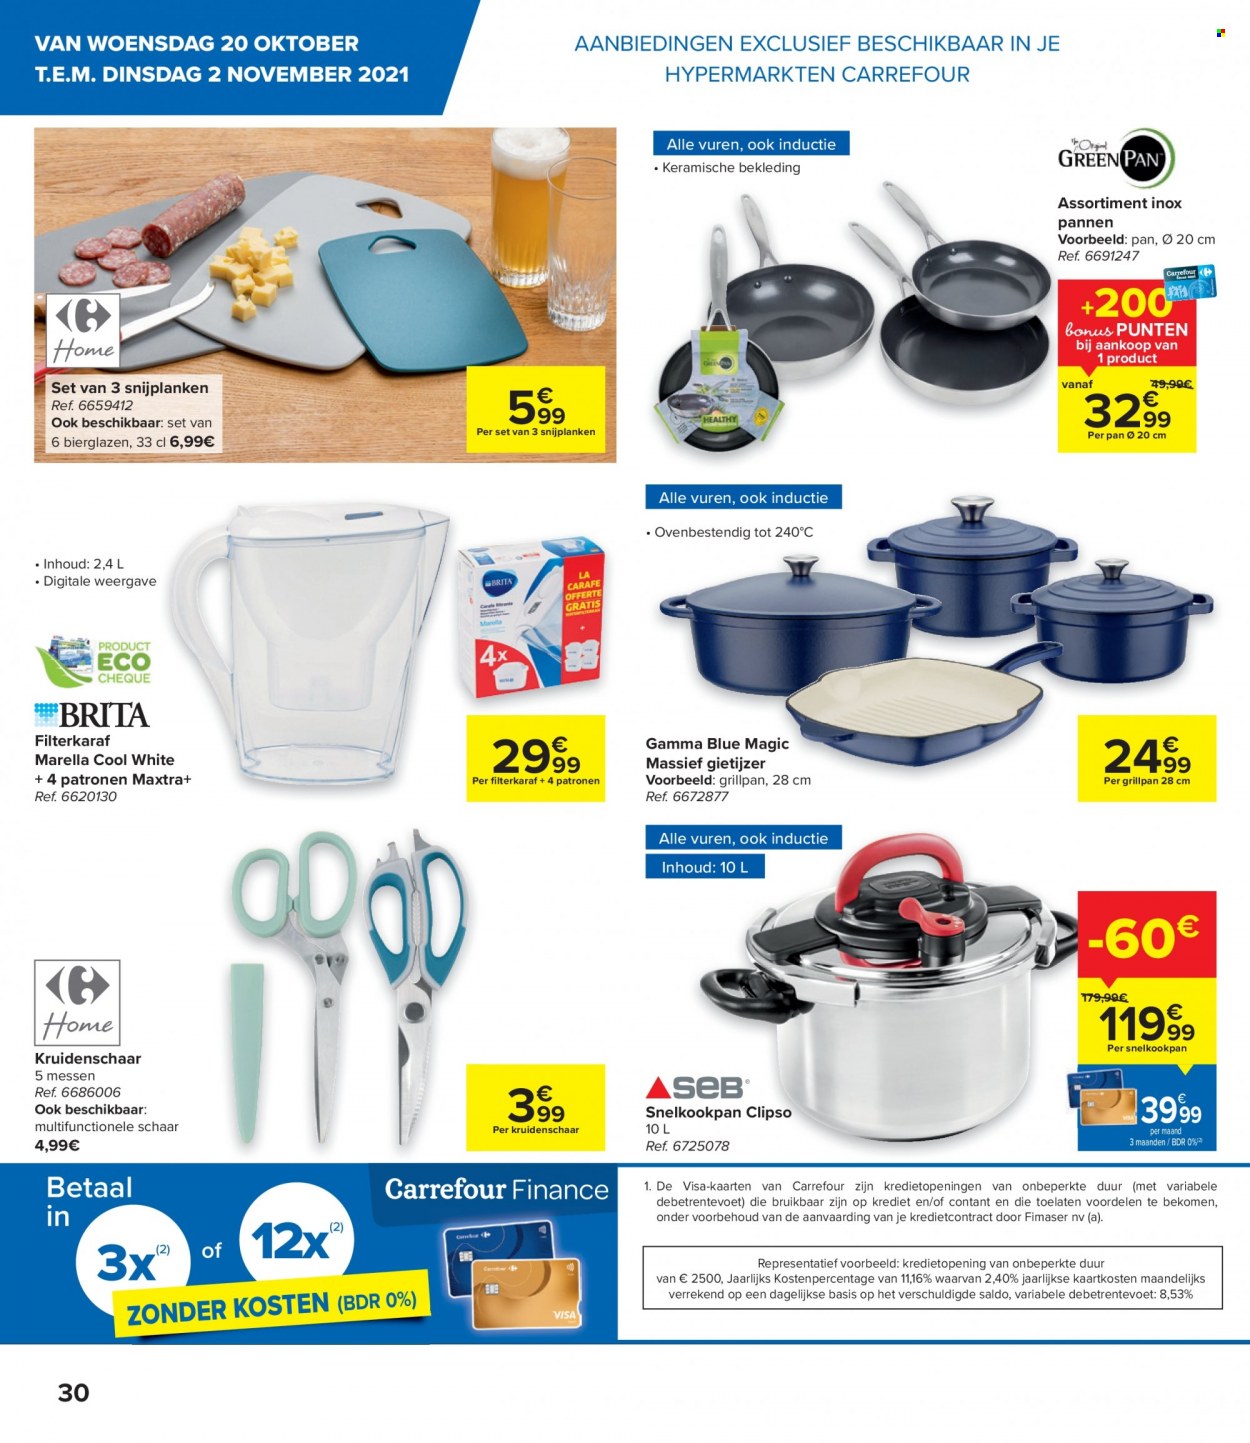 Catalogue Carrefour hypermarkt - 20.10.2021 - 2.11.2021. Page 6.